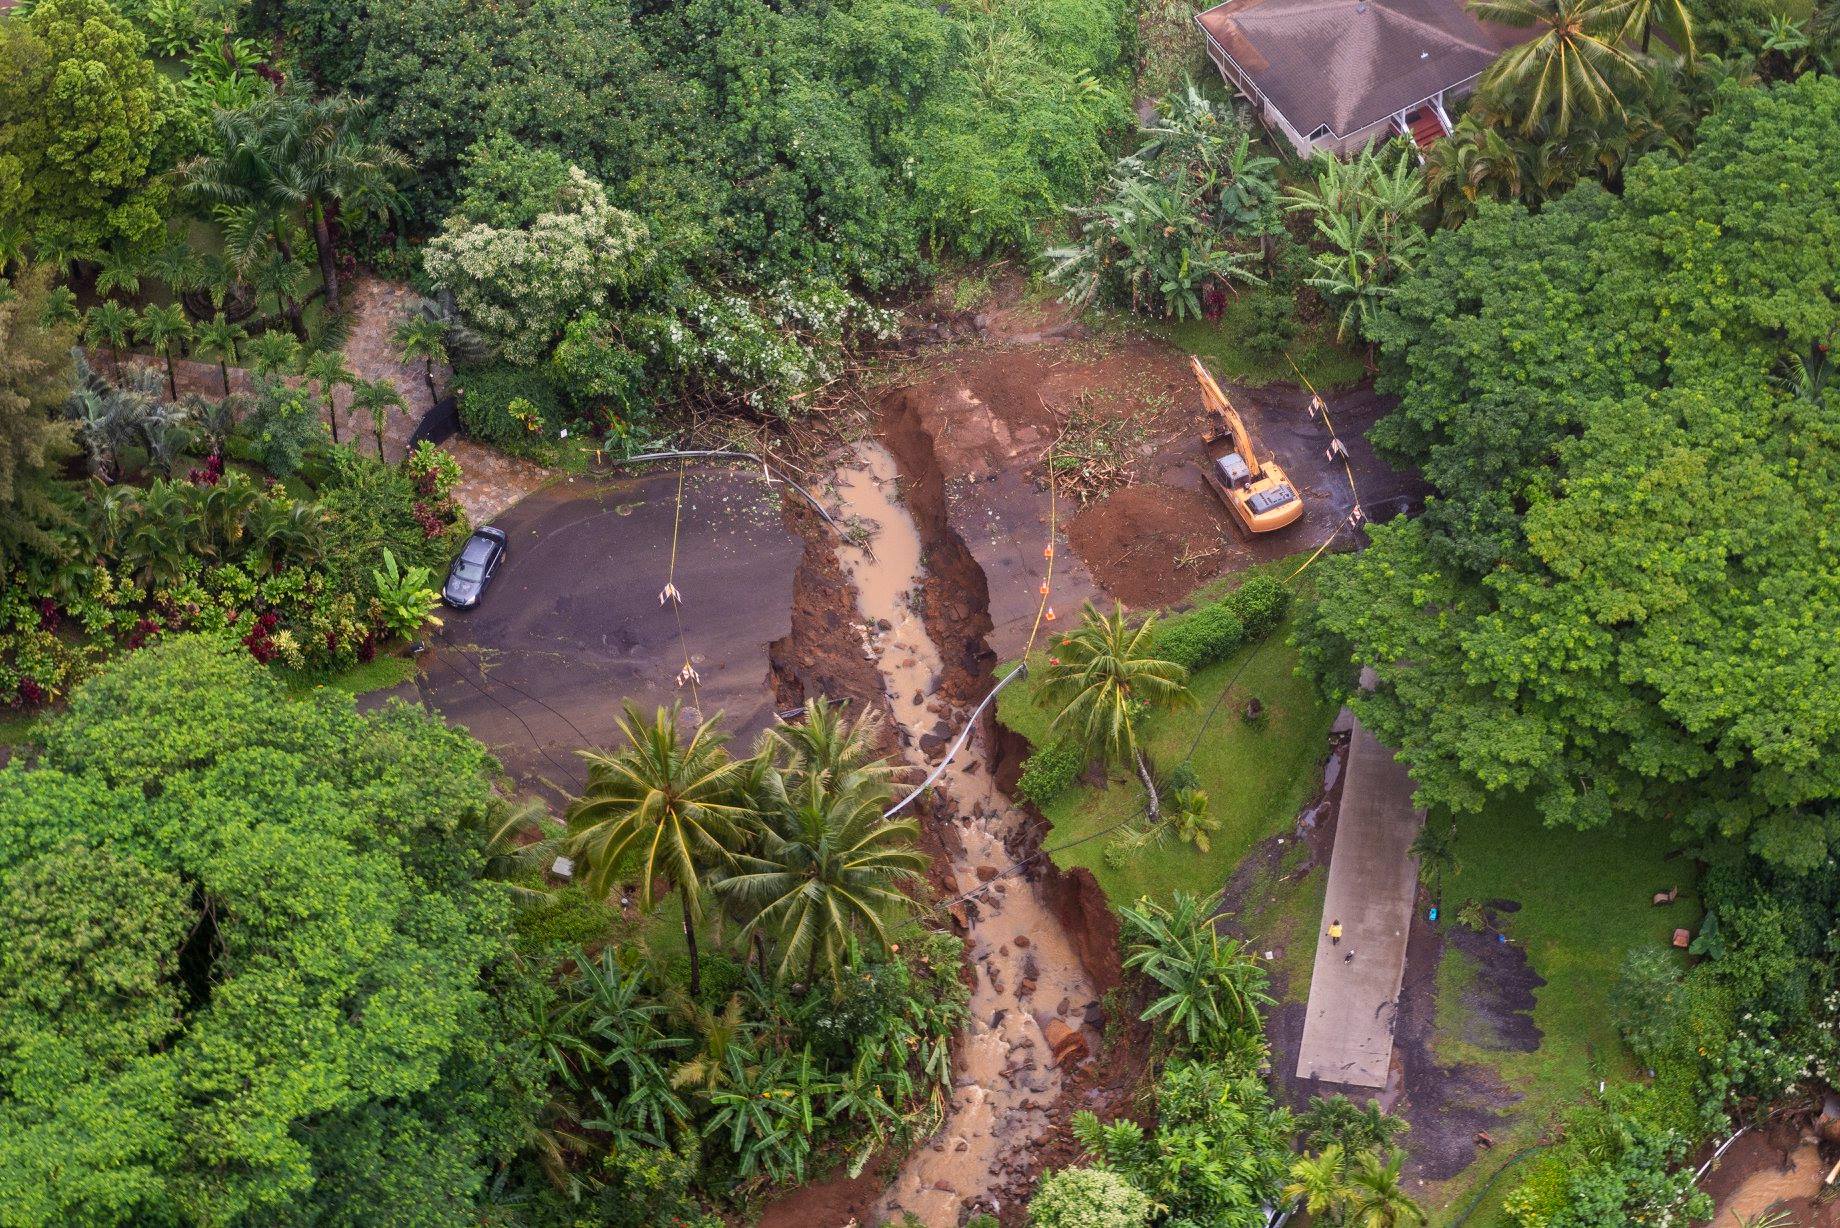 The image shows an aerial view of damage caused on Maui by Hurricane Lane in 2018, including an area where flood water caused by heavy rain running down hill destroyed a large section of pavement.